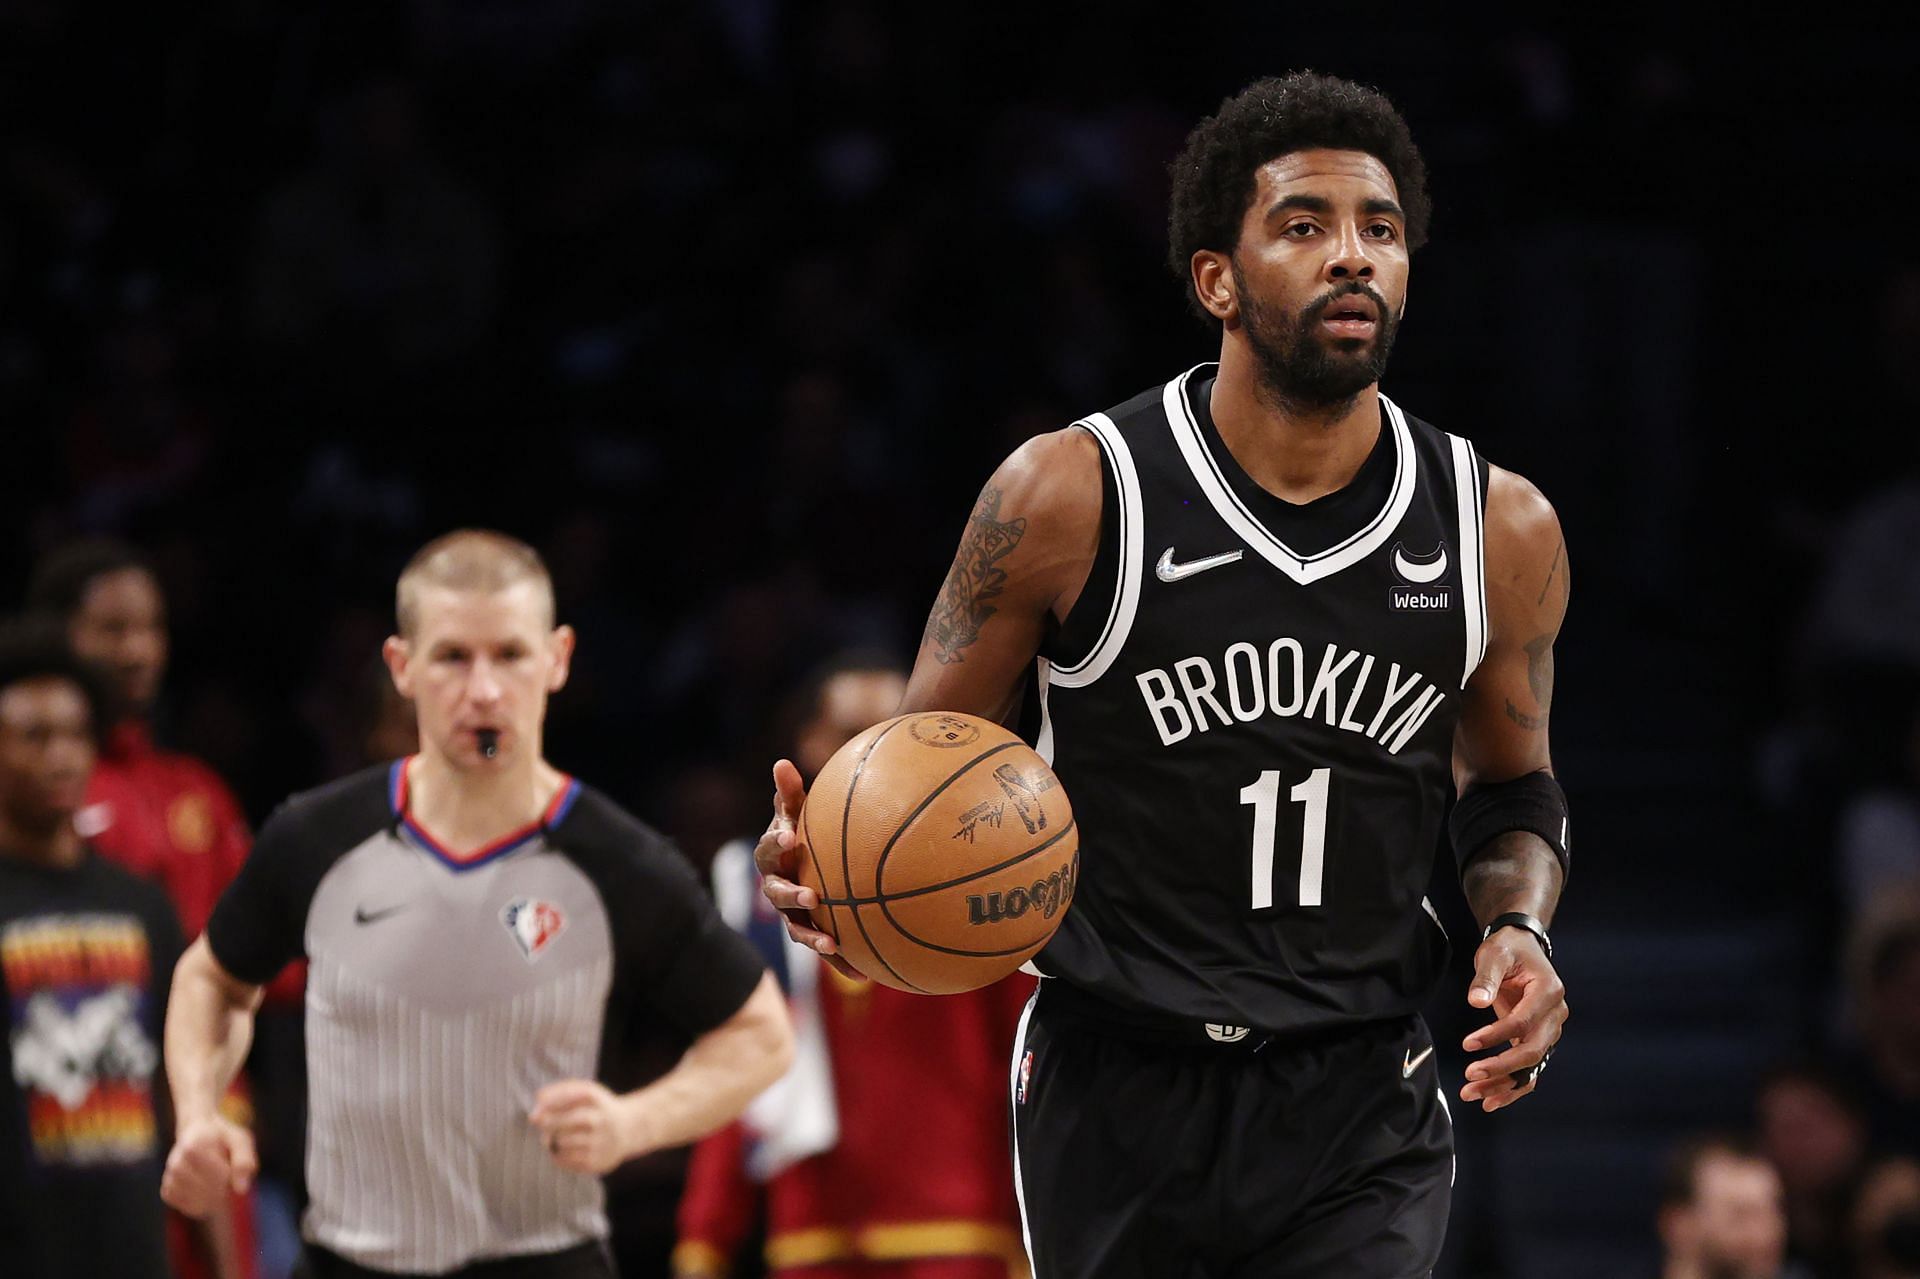 Kyrie Irving of the Brooklyn Nets in the 2022 NBA Play-In Tournament